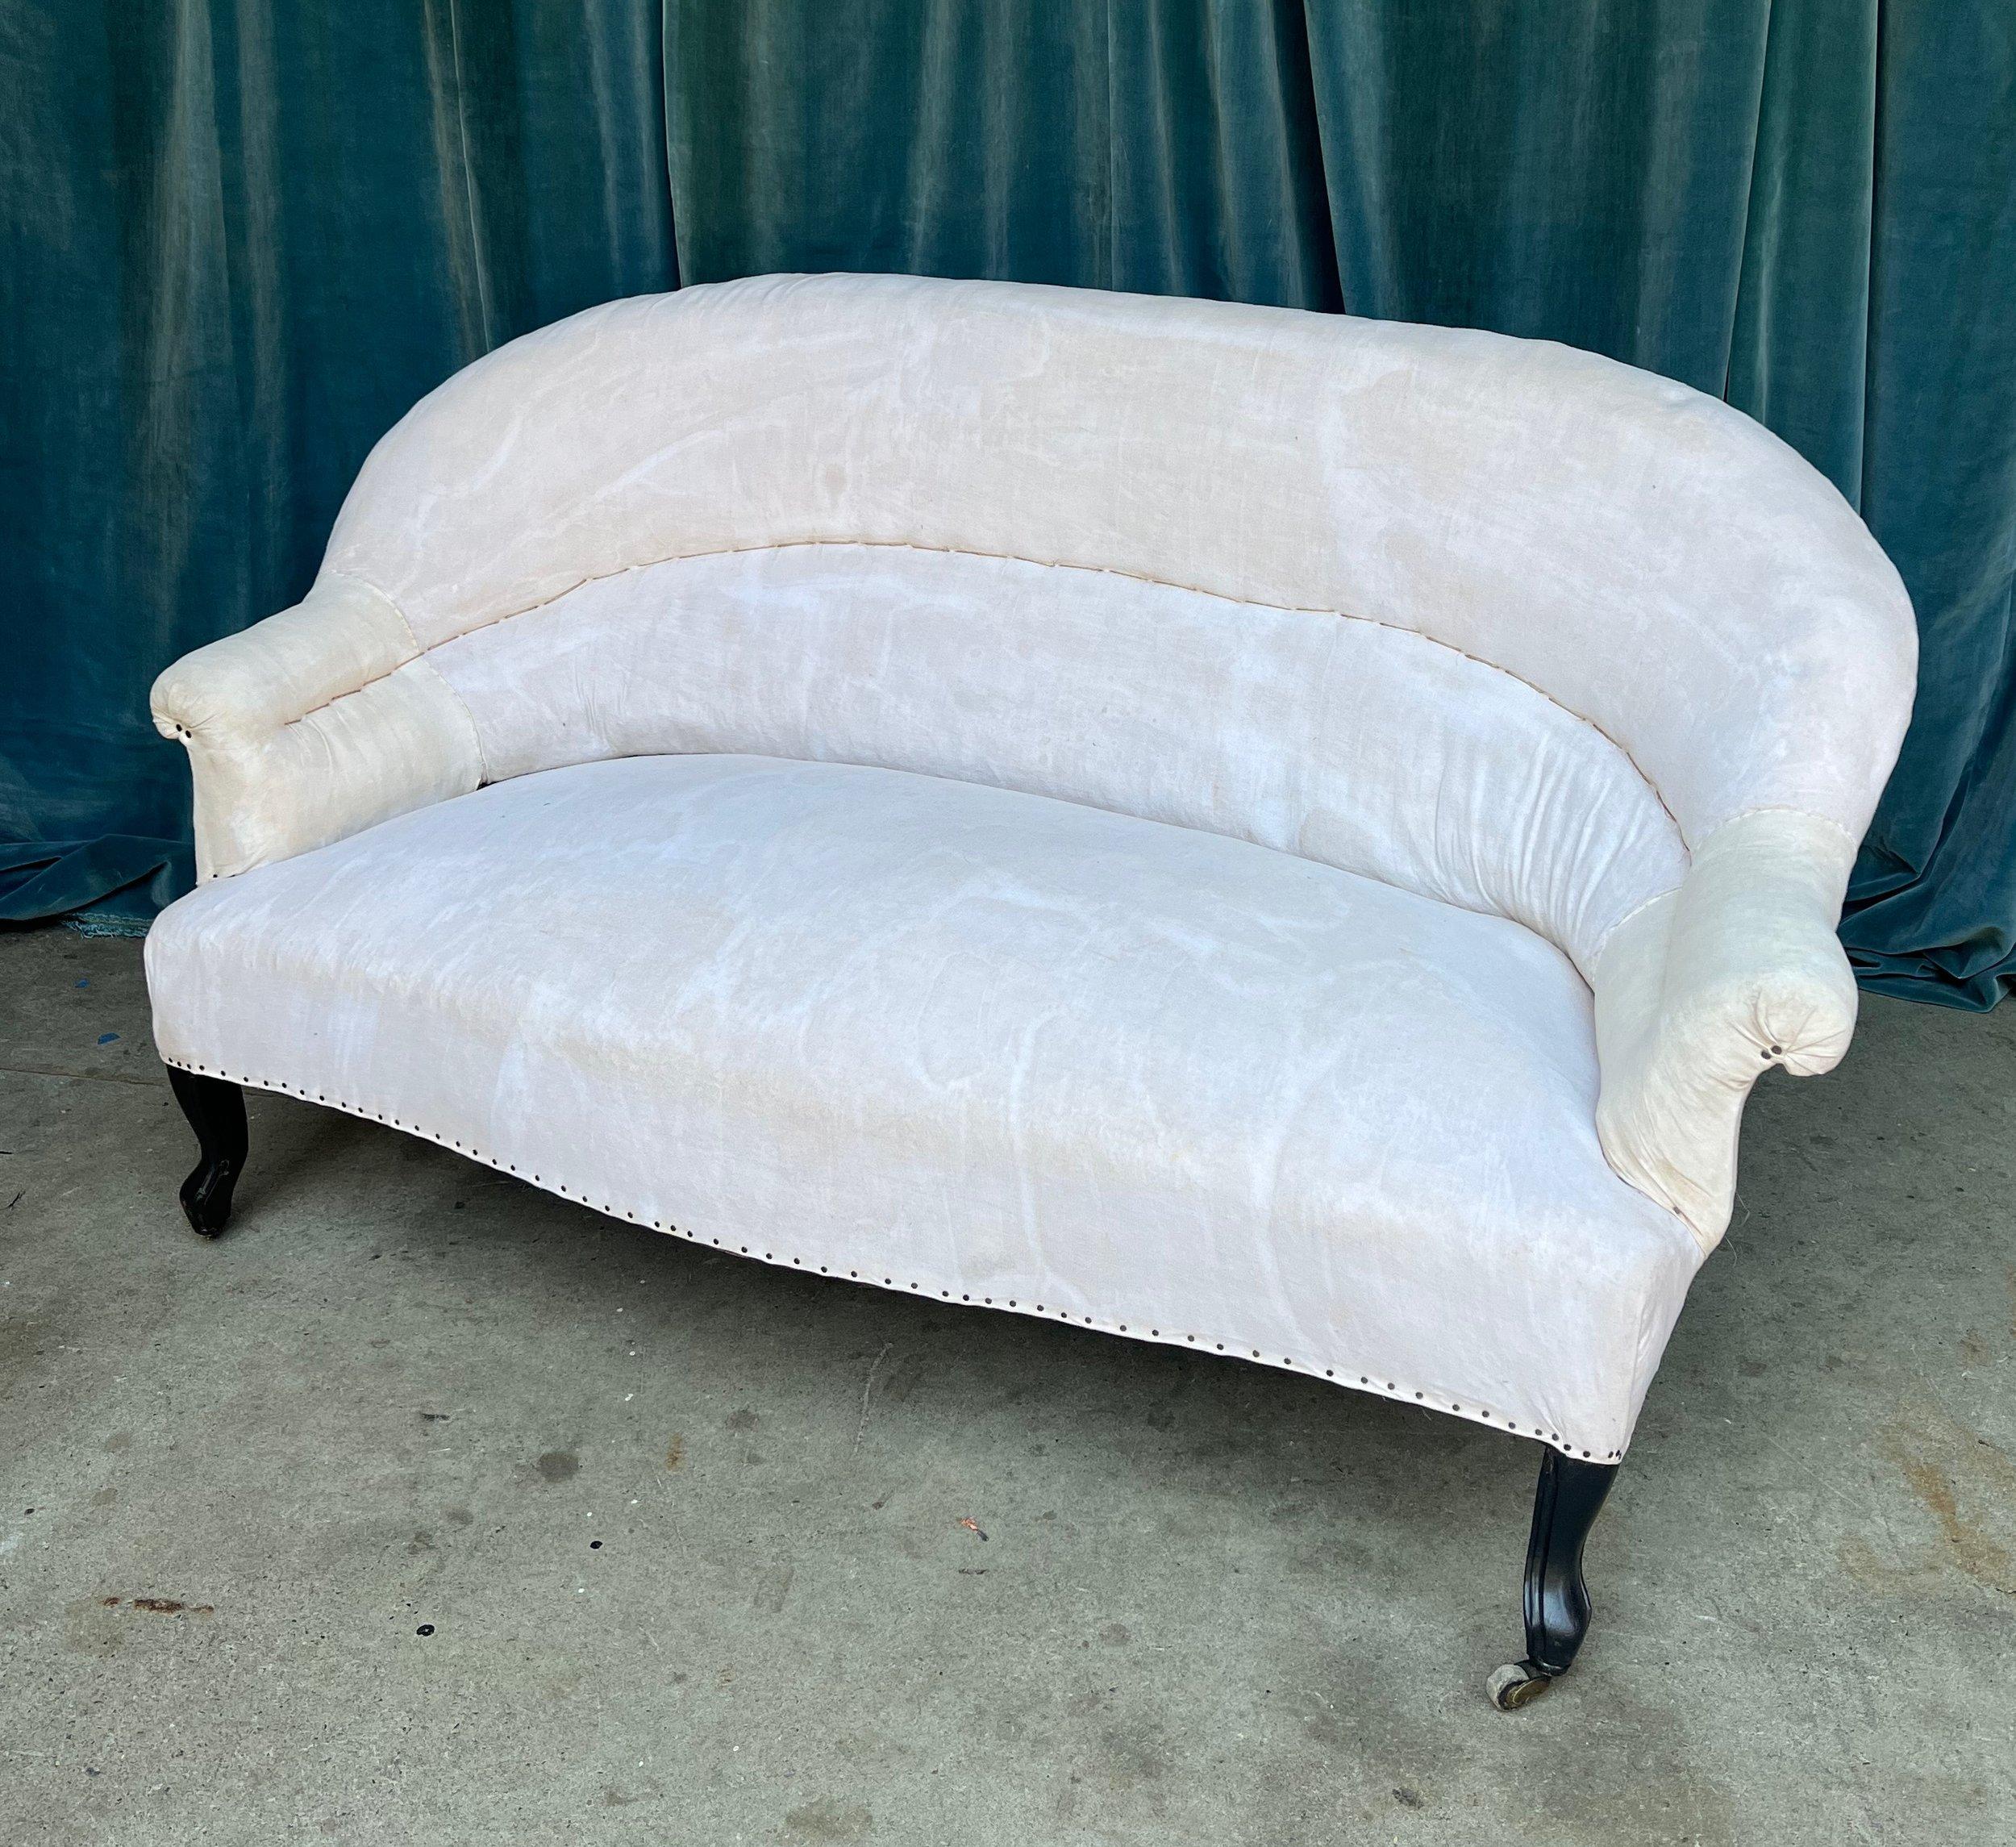 An elegant French early 20th century small scale settee in the Napoleon III style. This French settee is a timeless piece of furniture that embodies classic elegance. Its gracious curved back with built-in lumbar support and rolled arms are typical